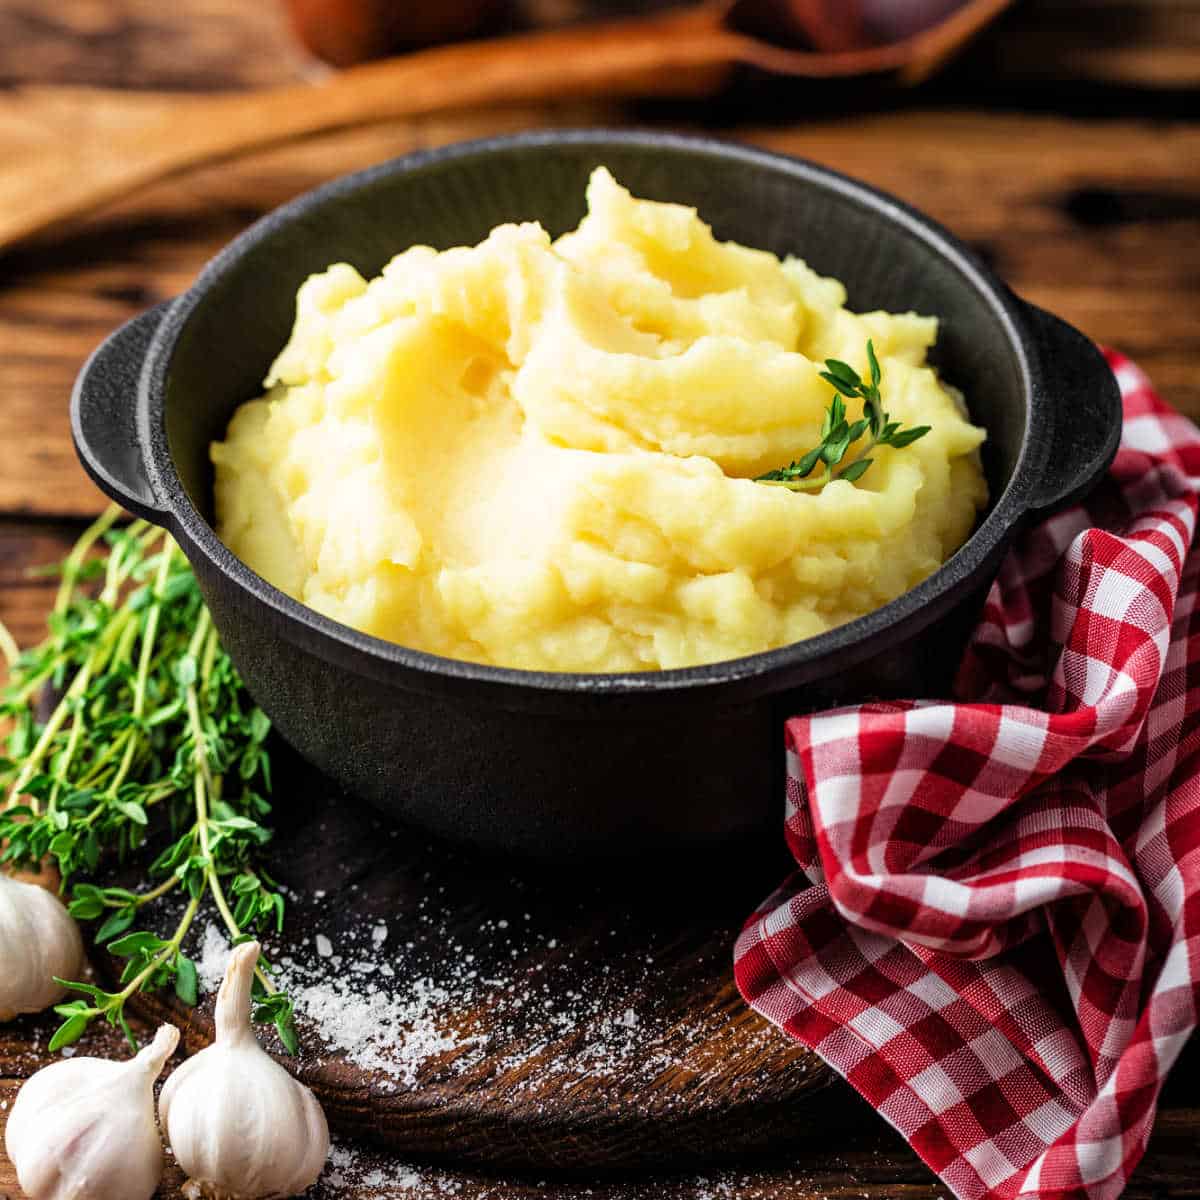 Black serving dish, filled with mashed potatoes, wrapped in a red and white checkered napkin set on a brown wooden table with fresh thyme sprigs and garlic bulbs on the left side.